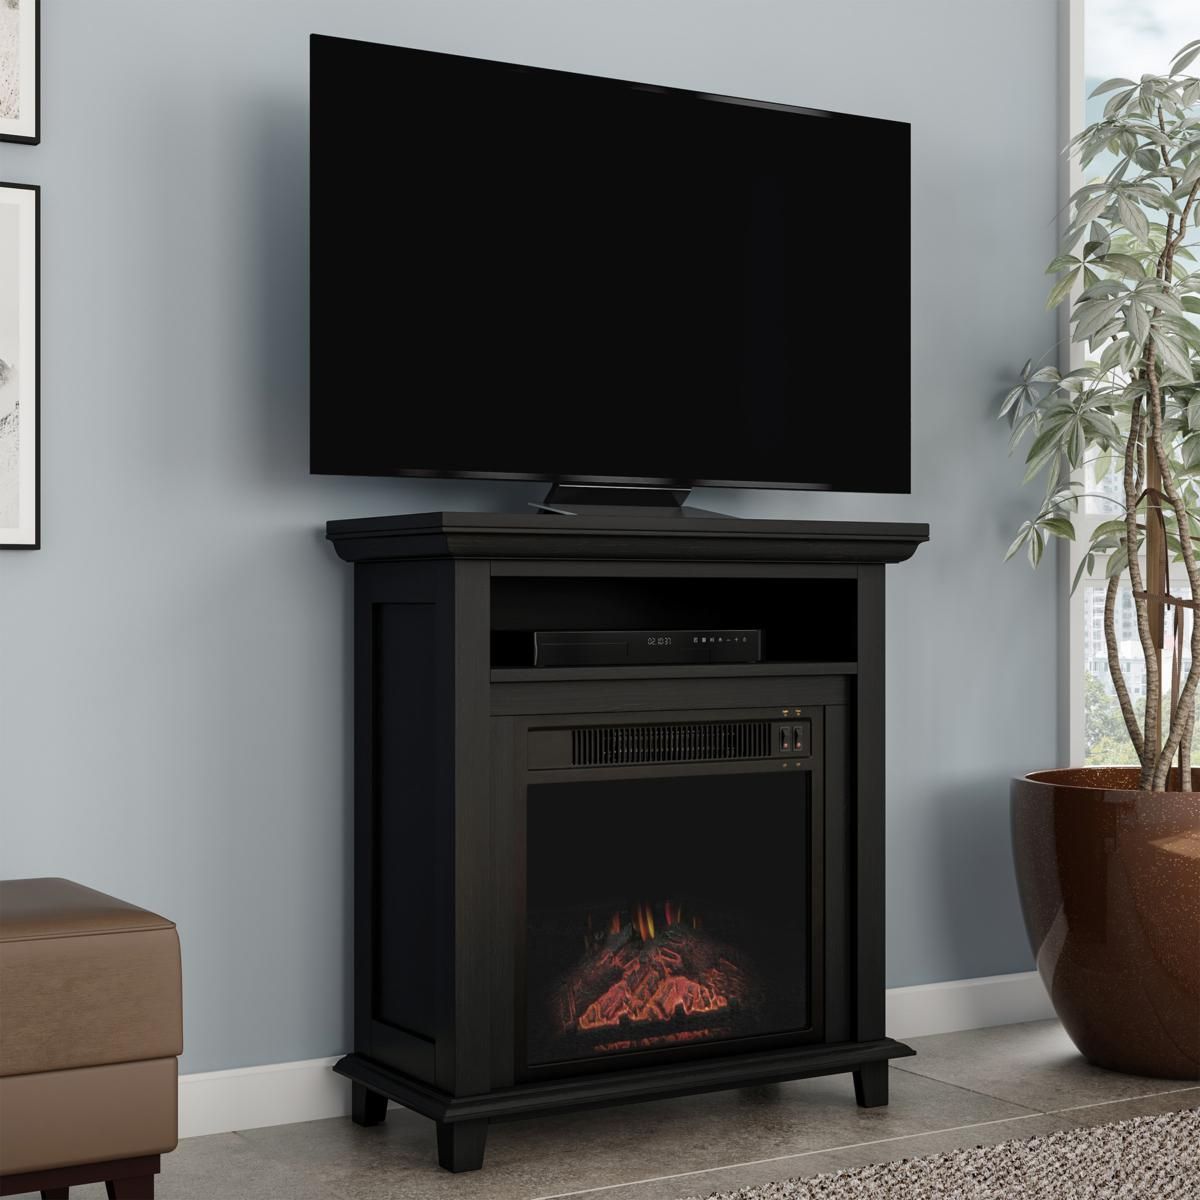 Northwest 29" Electric Fireplace Tv Stand – Black – 9842629 | Hsn In Tv Stands With Electric Fireplace (View 9 of 15)